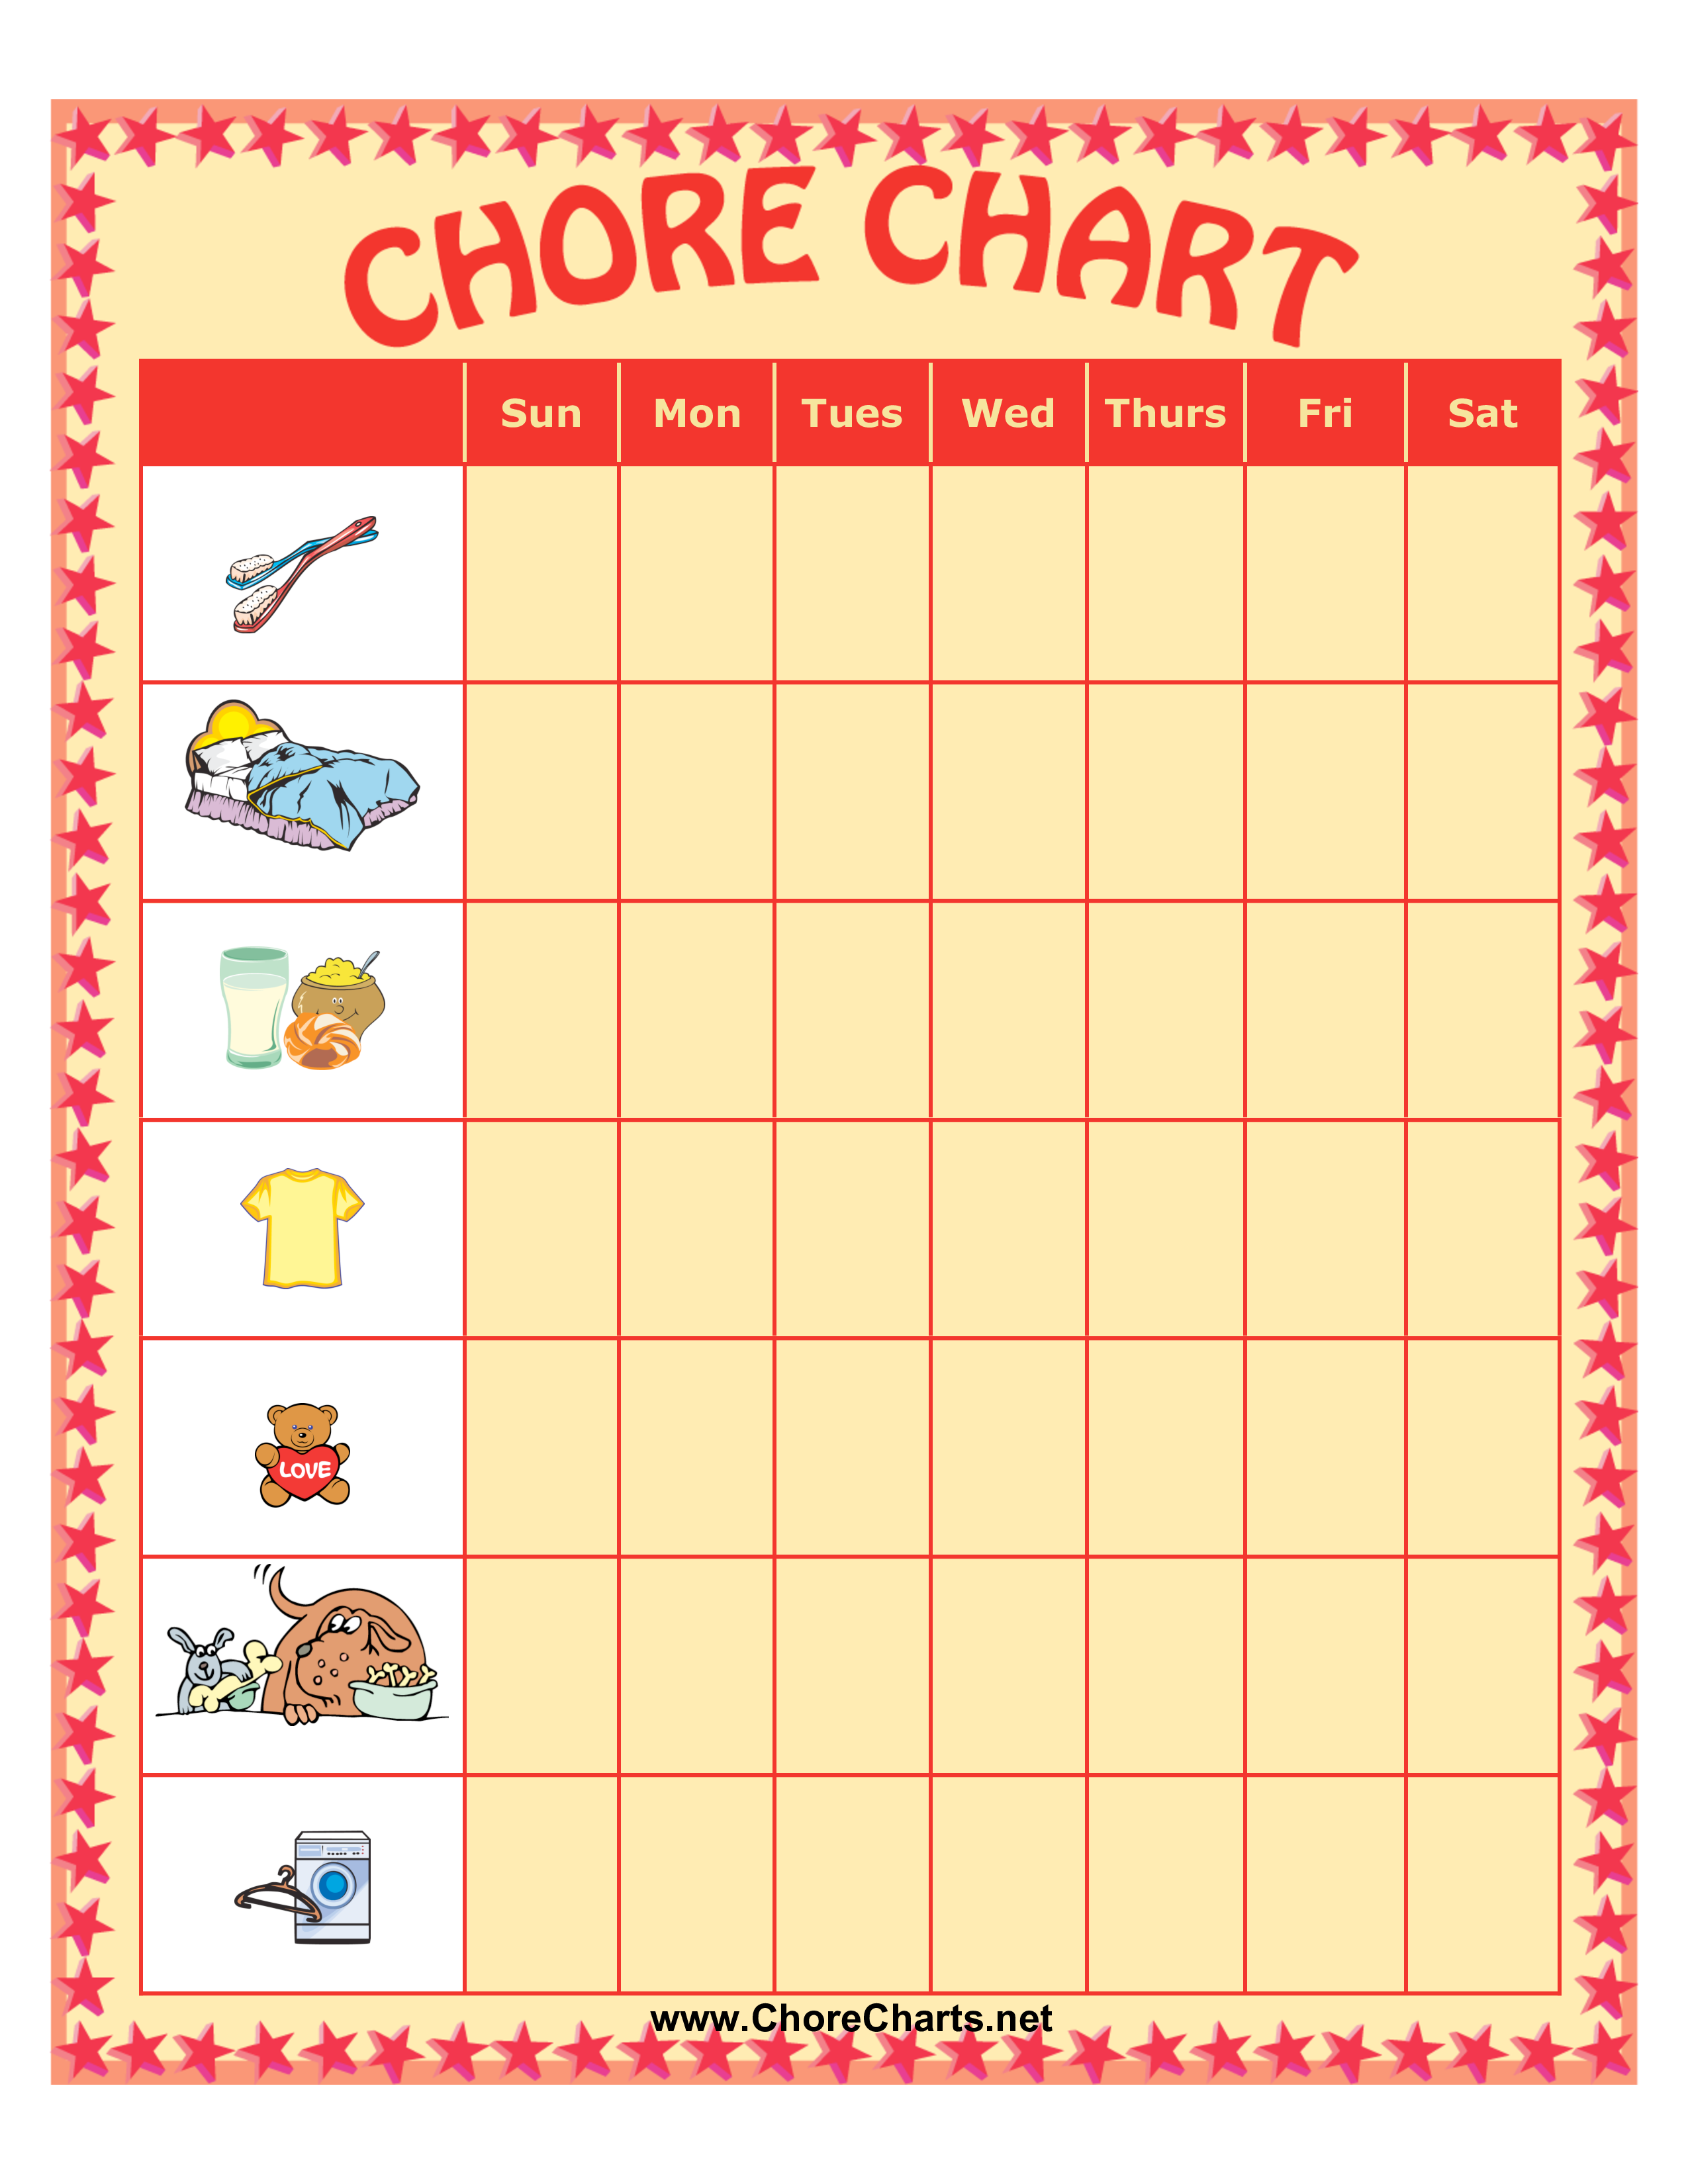 Weekly Chore Chart For Kids Templates At Allbusinesstemplates